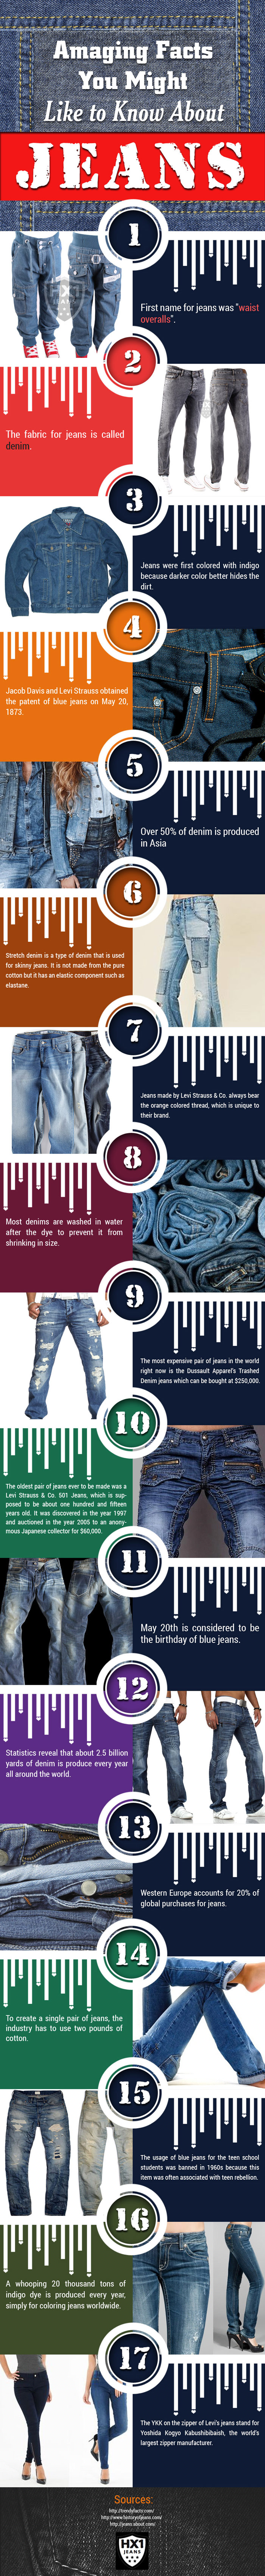 17 Amazing Facts About Jeans You Didn't Know 3